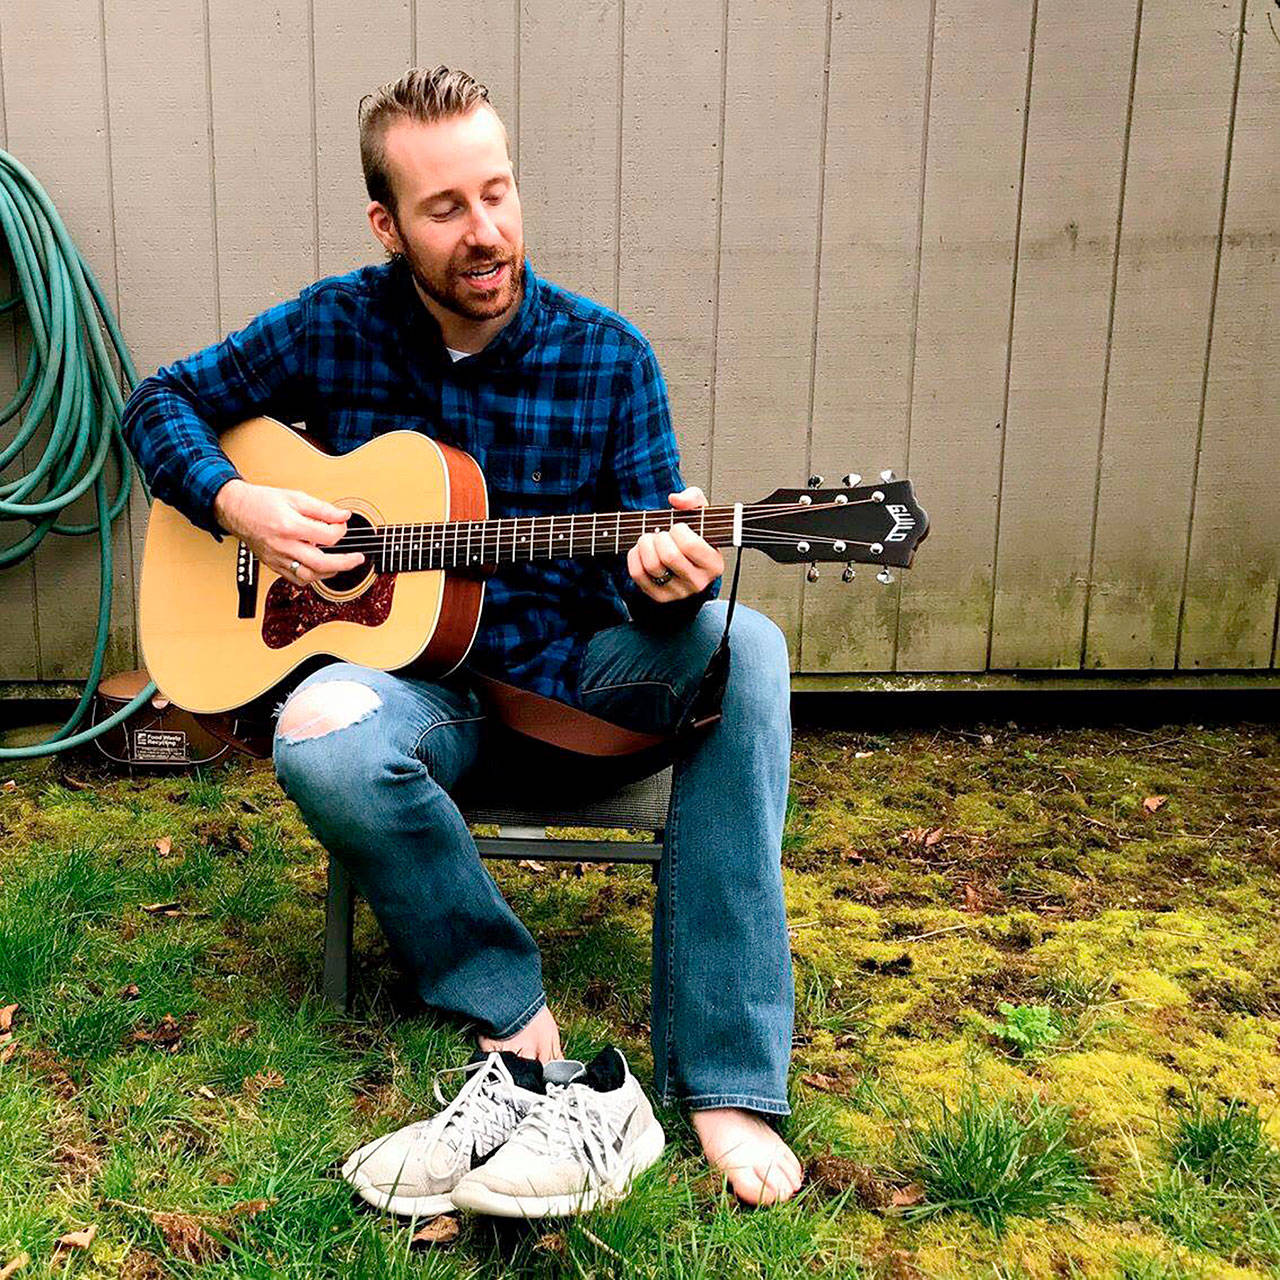 Contributed photo — Josh Turner, a 2007 graduate of South Whidbey High School, recently released a new album intended to help children cope with emotions they face on a daily on basis.